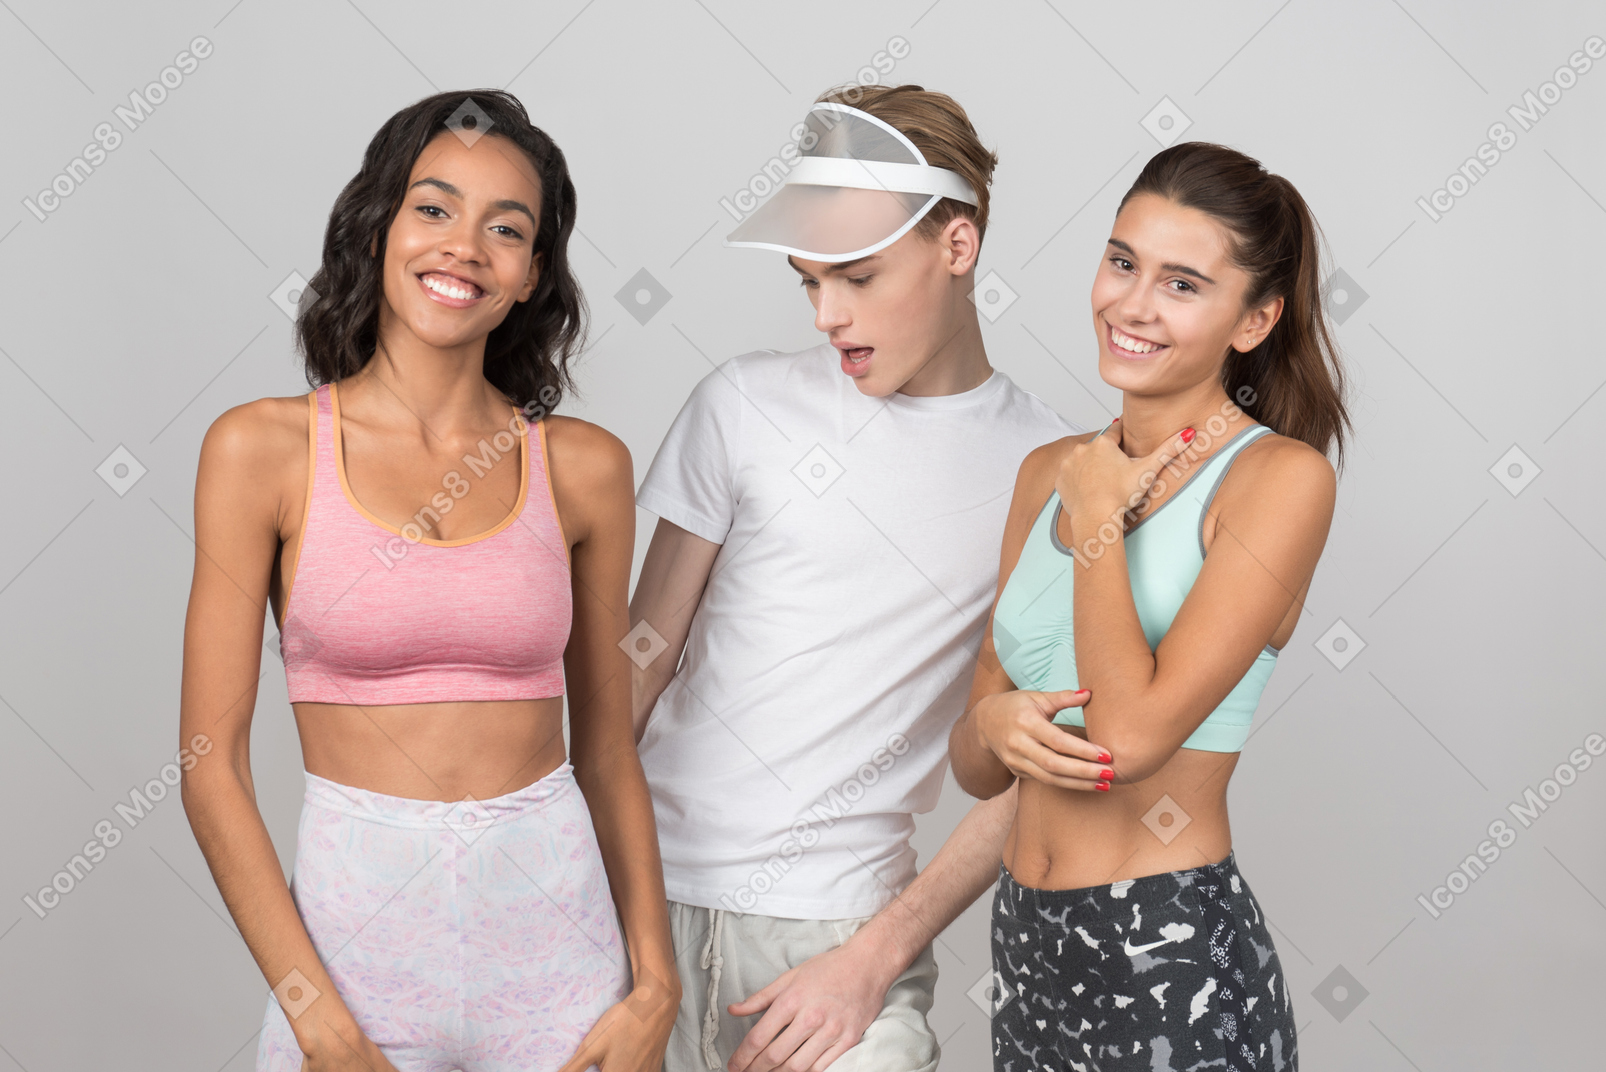 Guy standing in company of friends and checking out out his friend's abs